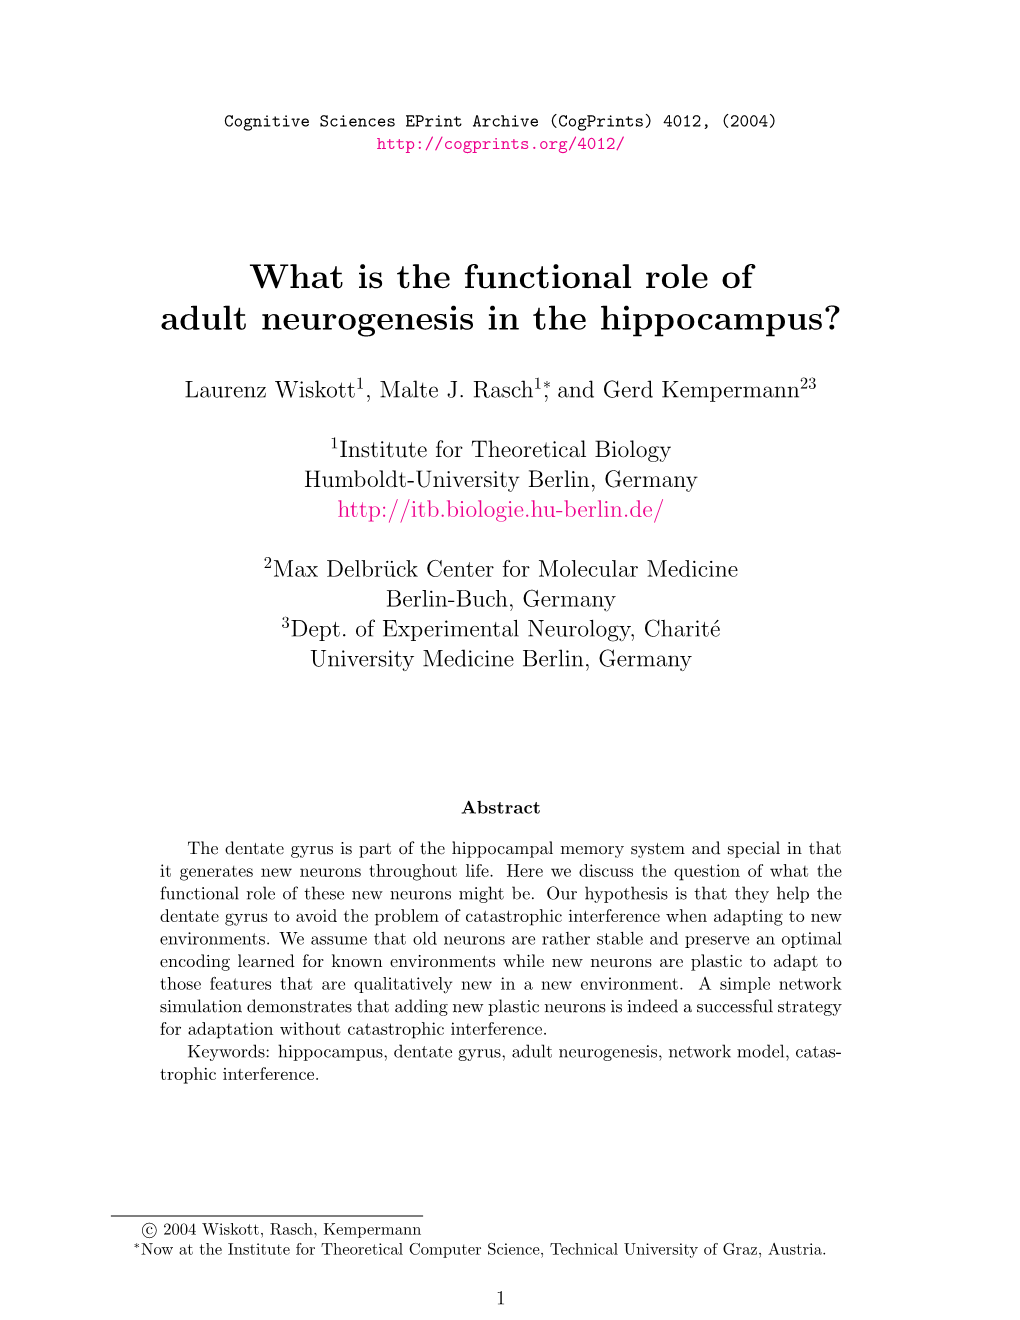 What Is the Functional Role of Adult Neurogenesis in the Hippocampus?